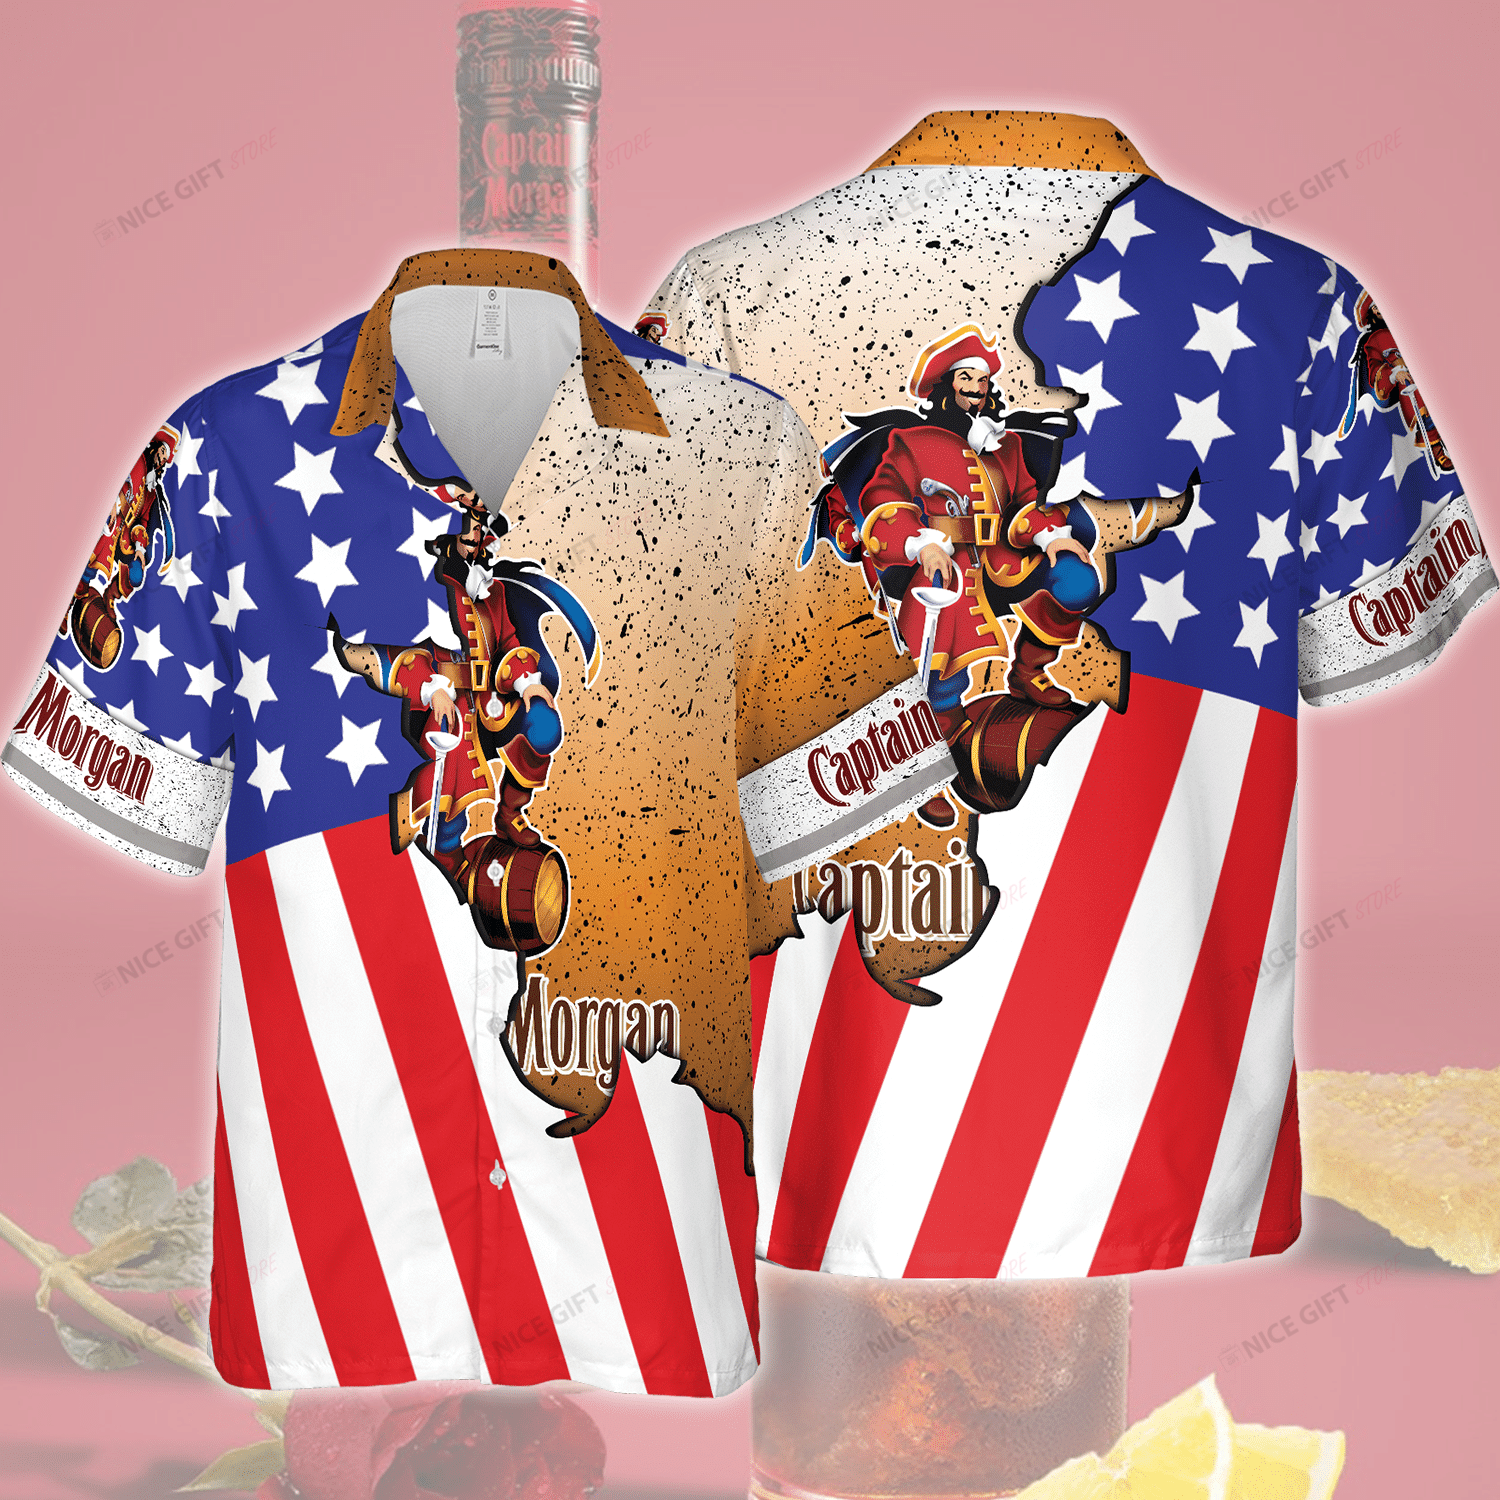 If you're a fan of a Hawaiian Shirt, you can choose one at our store 63